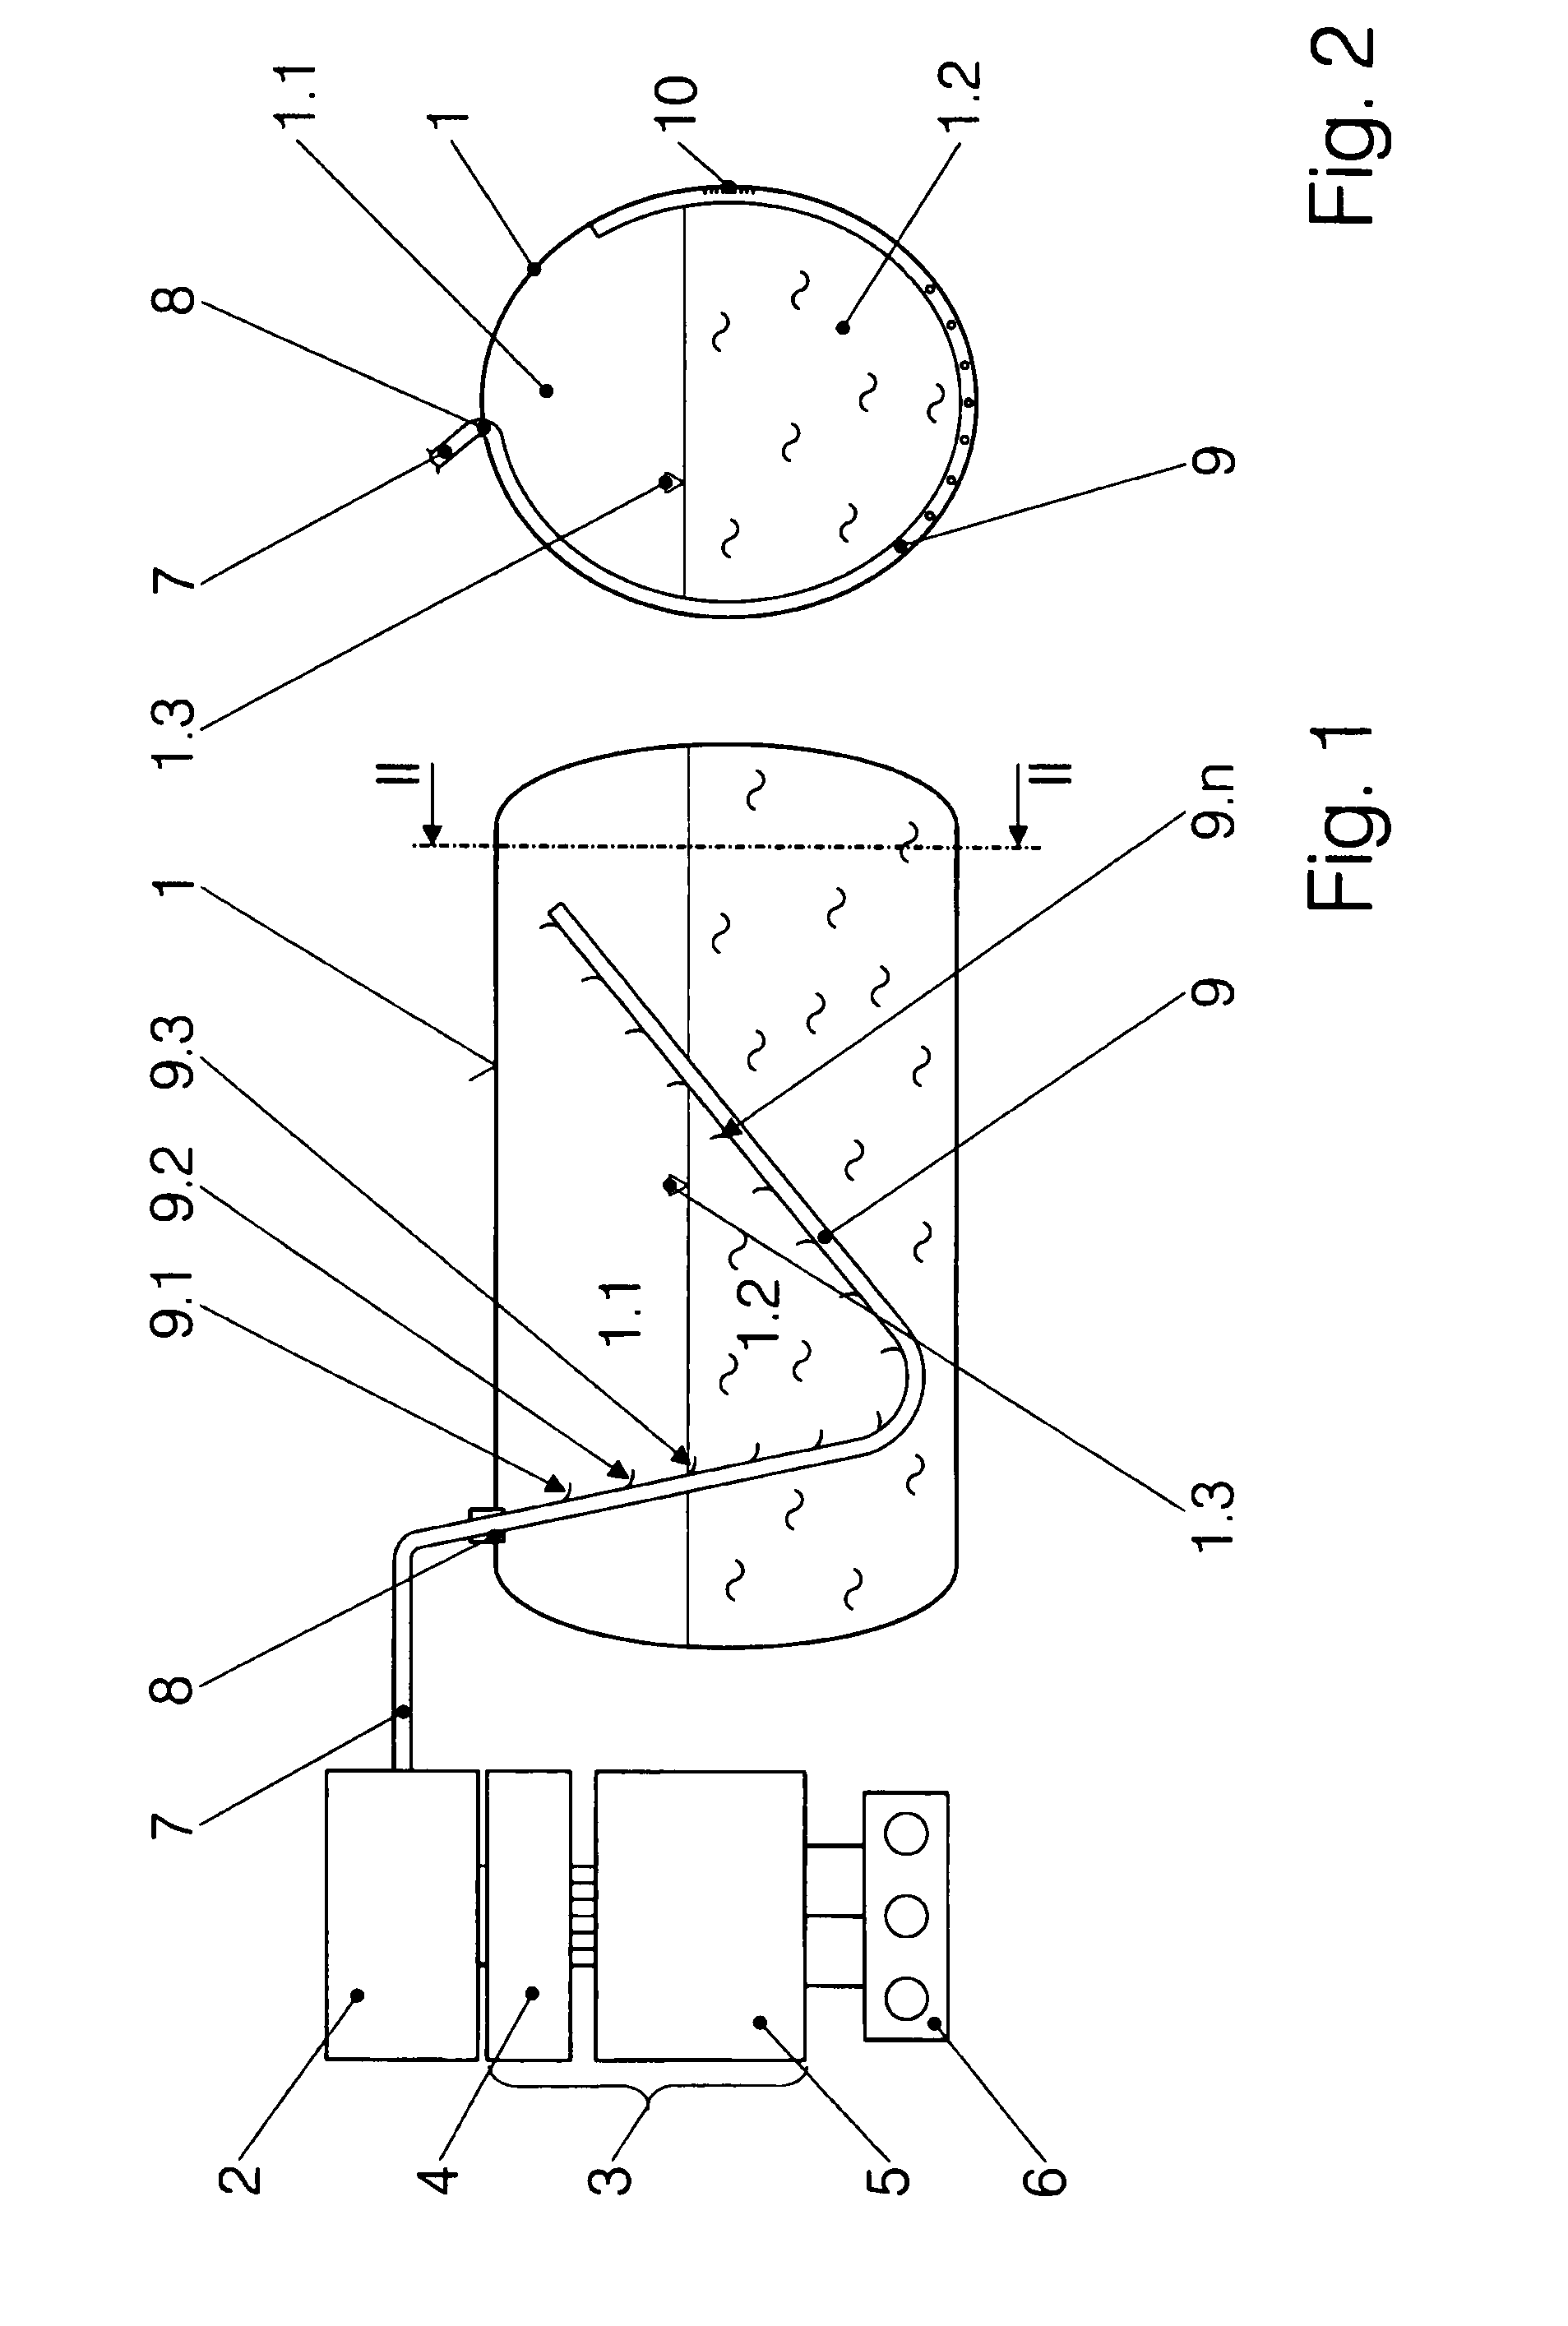 Method and device for the optical measurement of state variables and the level in a container for liquefied gases, and device therefor